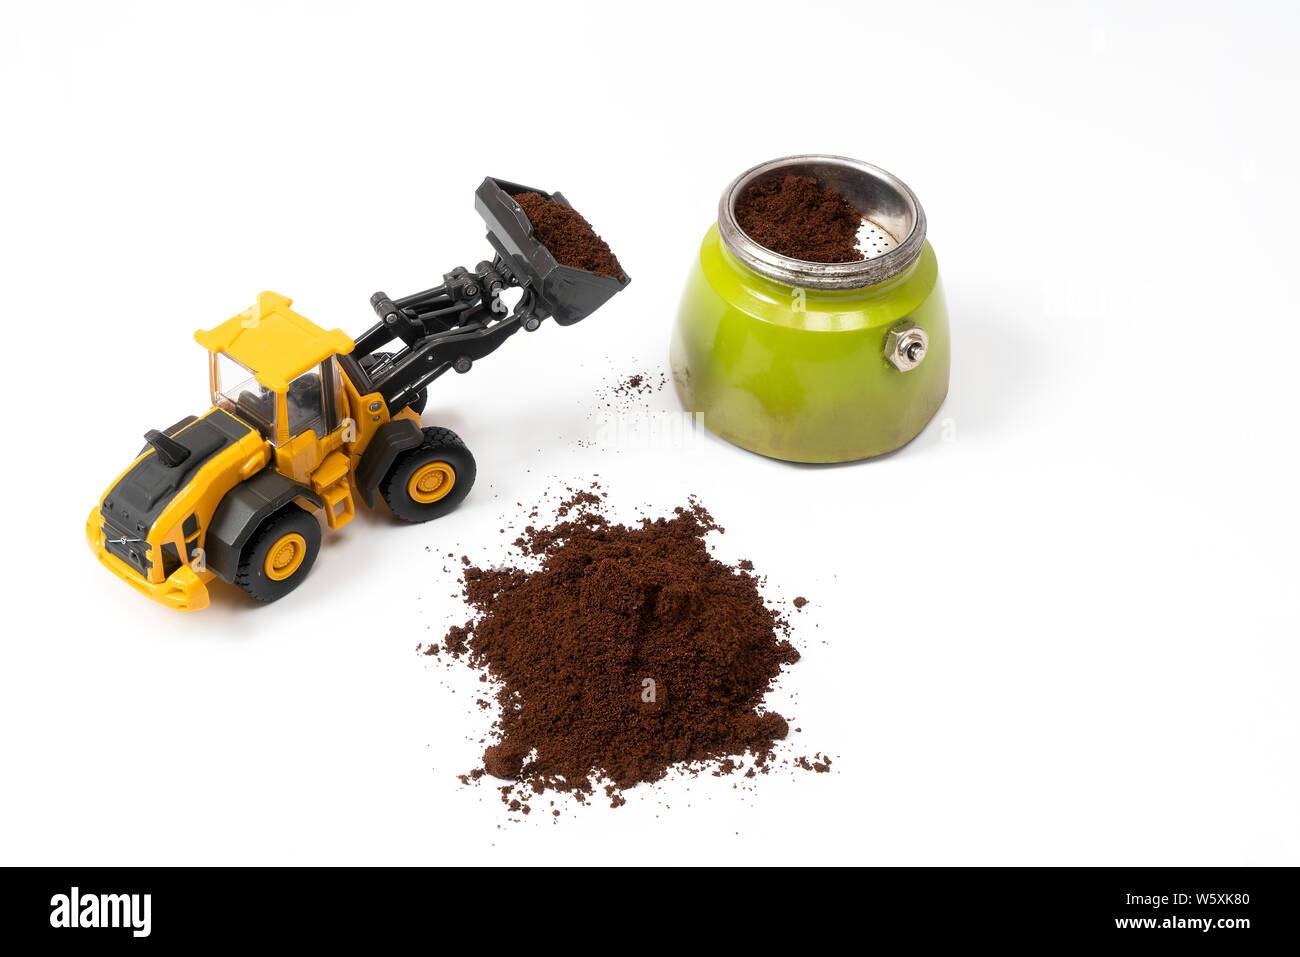 a bulldozer while loading coffee in the coffee maker Stock Photo